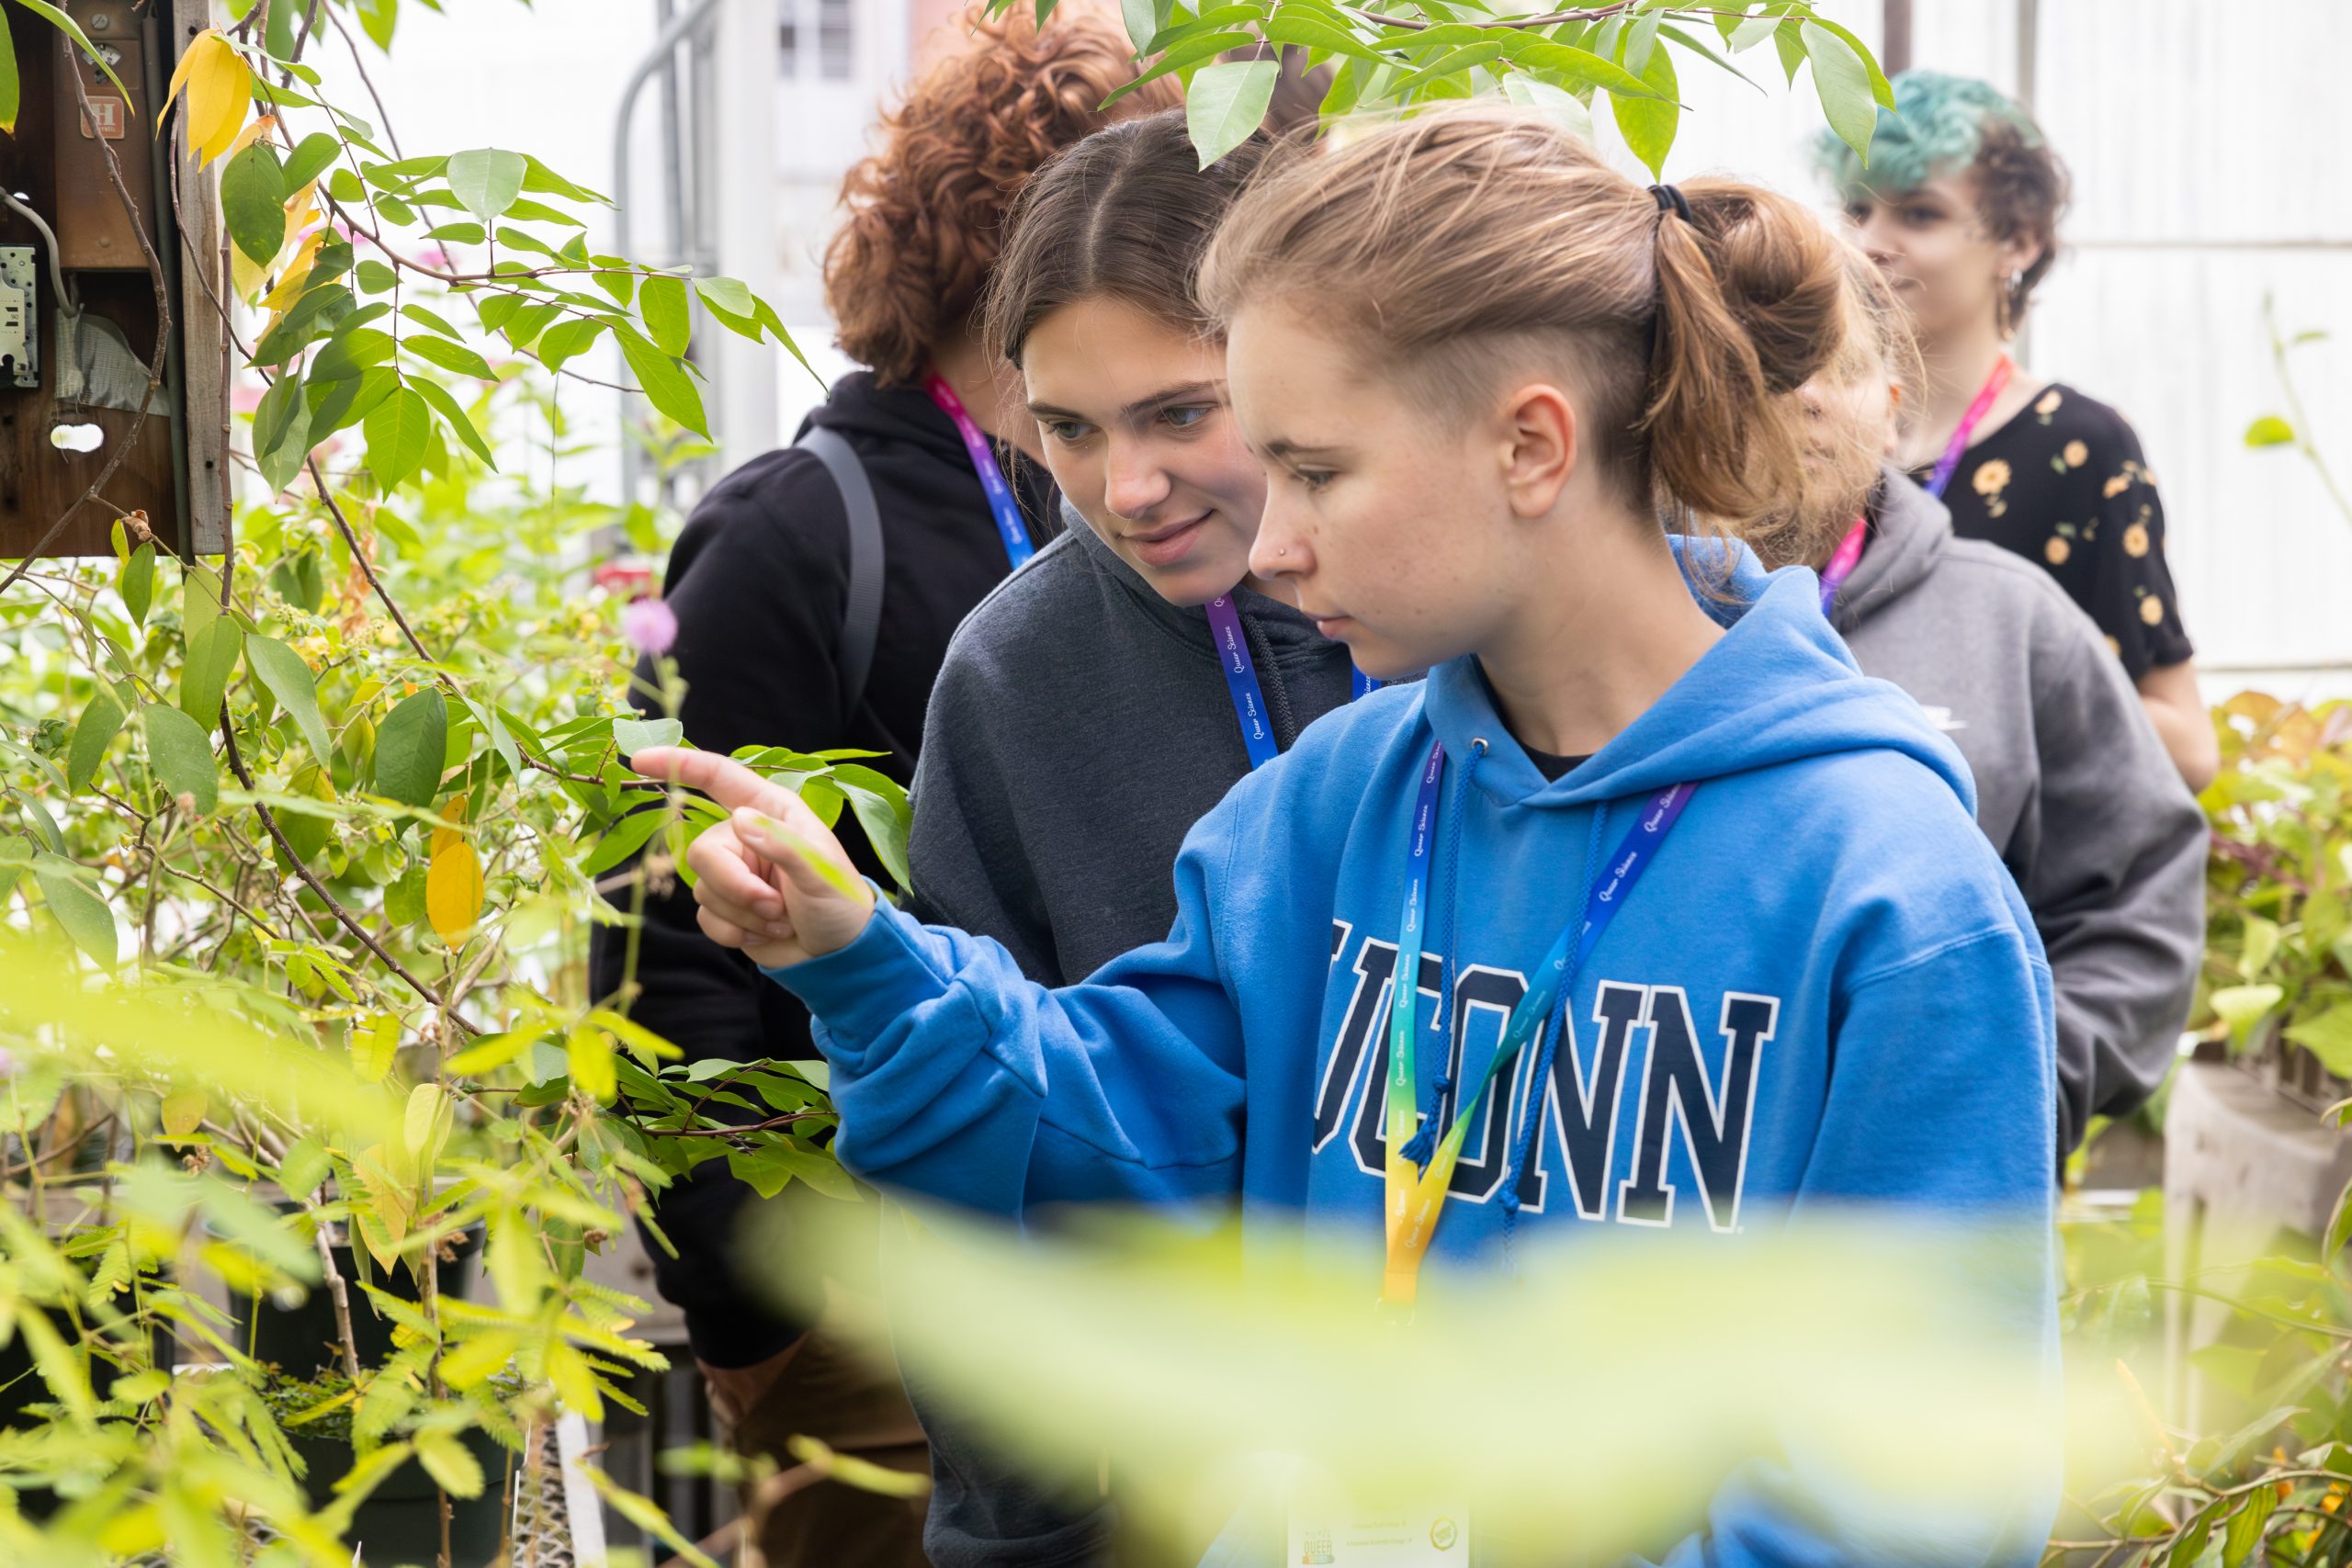 Hayes also led students through the EEB Biodiversity Education and Research greenhouses and pointed out various species of plants, including a sensitive plant that Brynn Mesick of Manchester High School, front, and Ava Harriman of Haddam-Killingworth High School took notice of